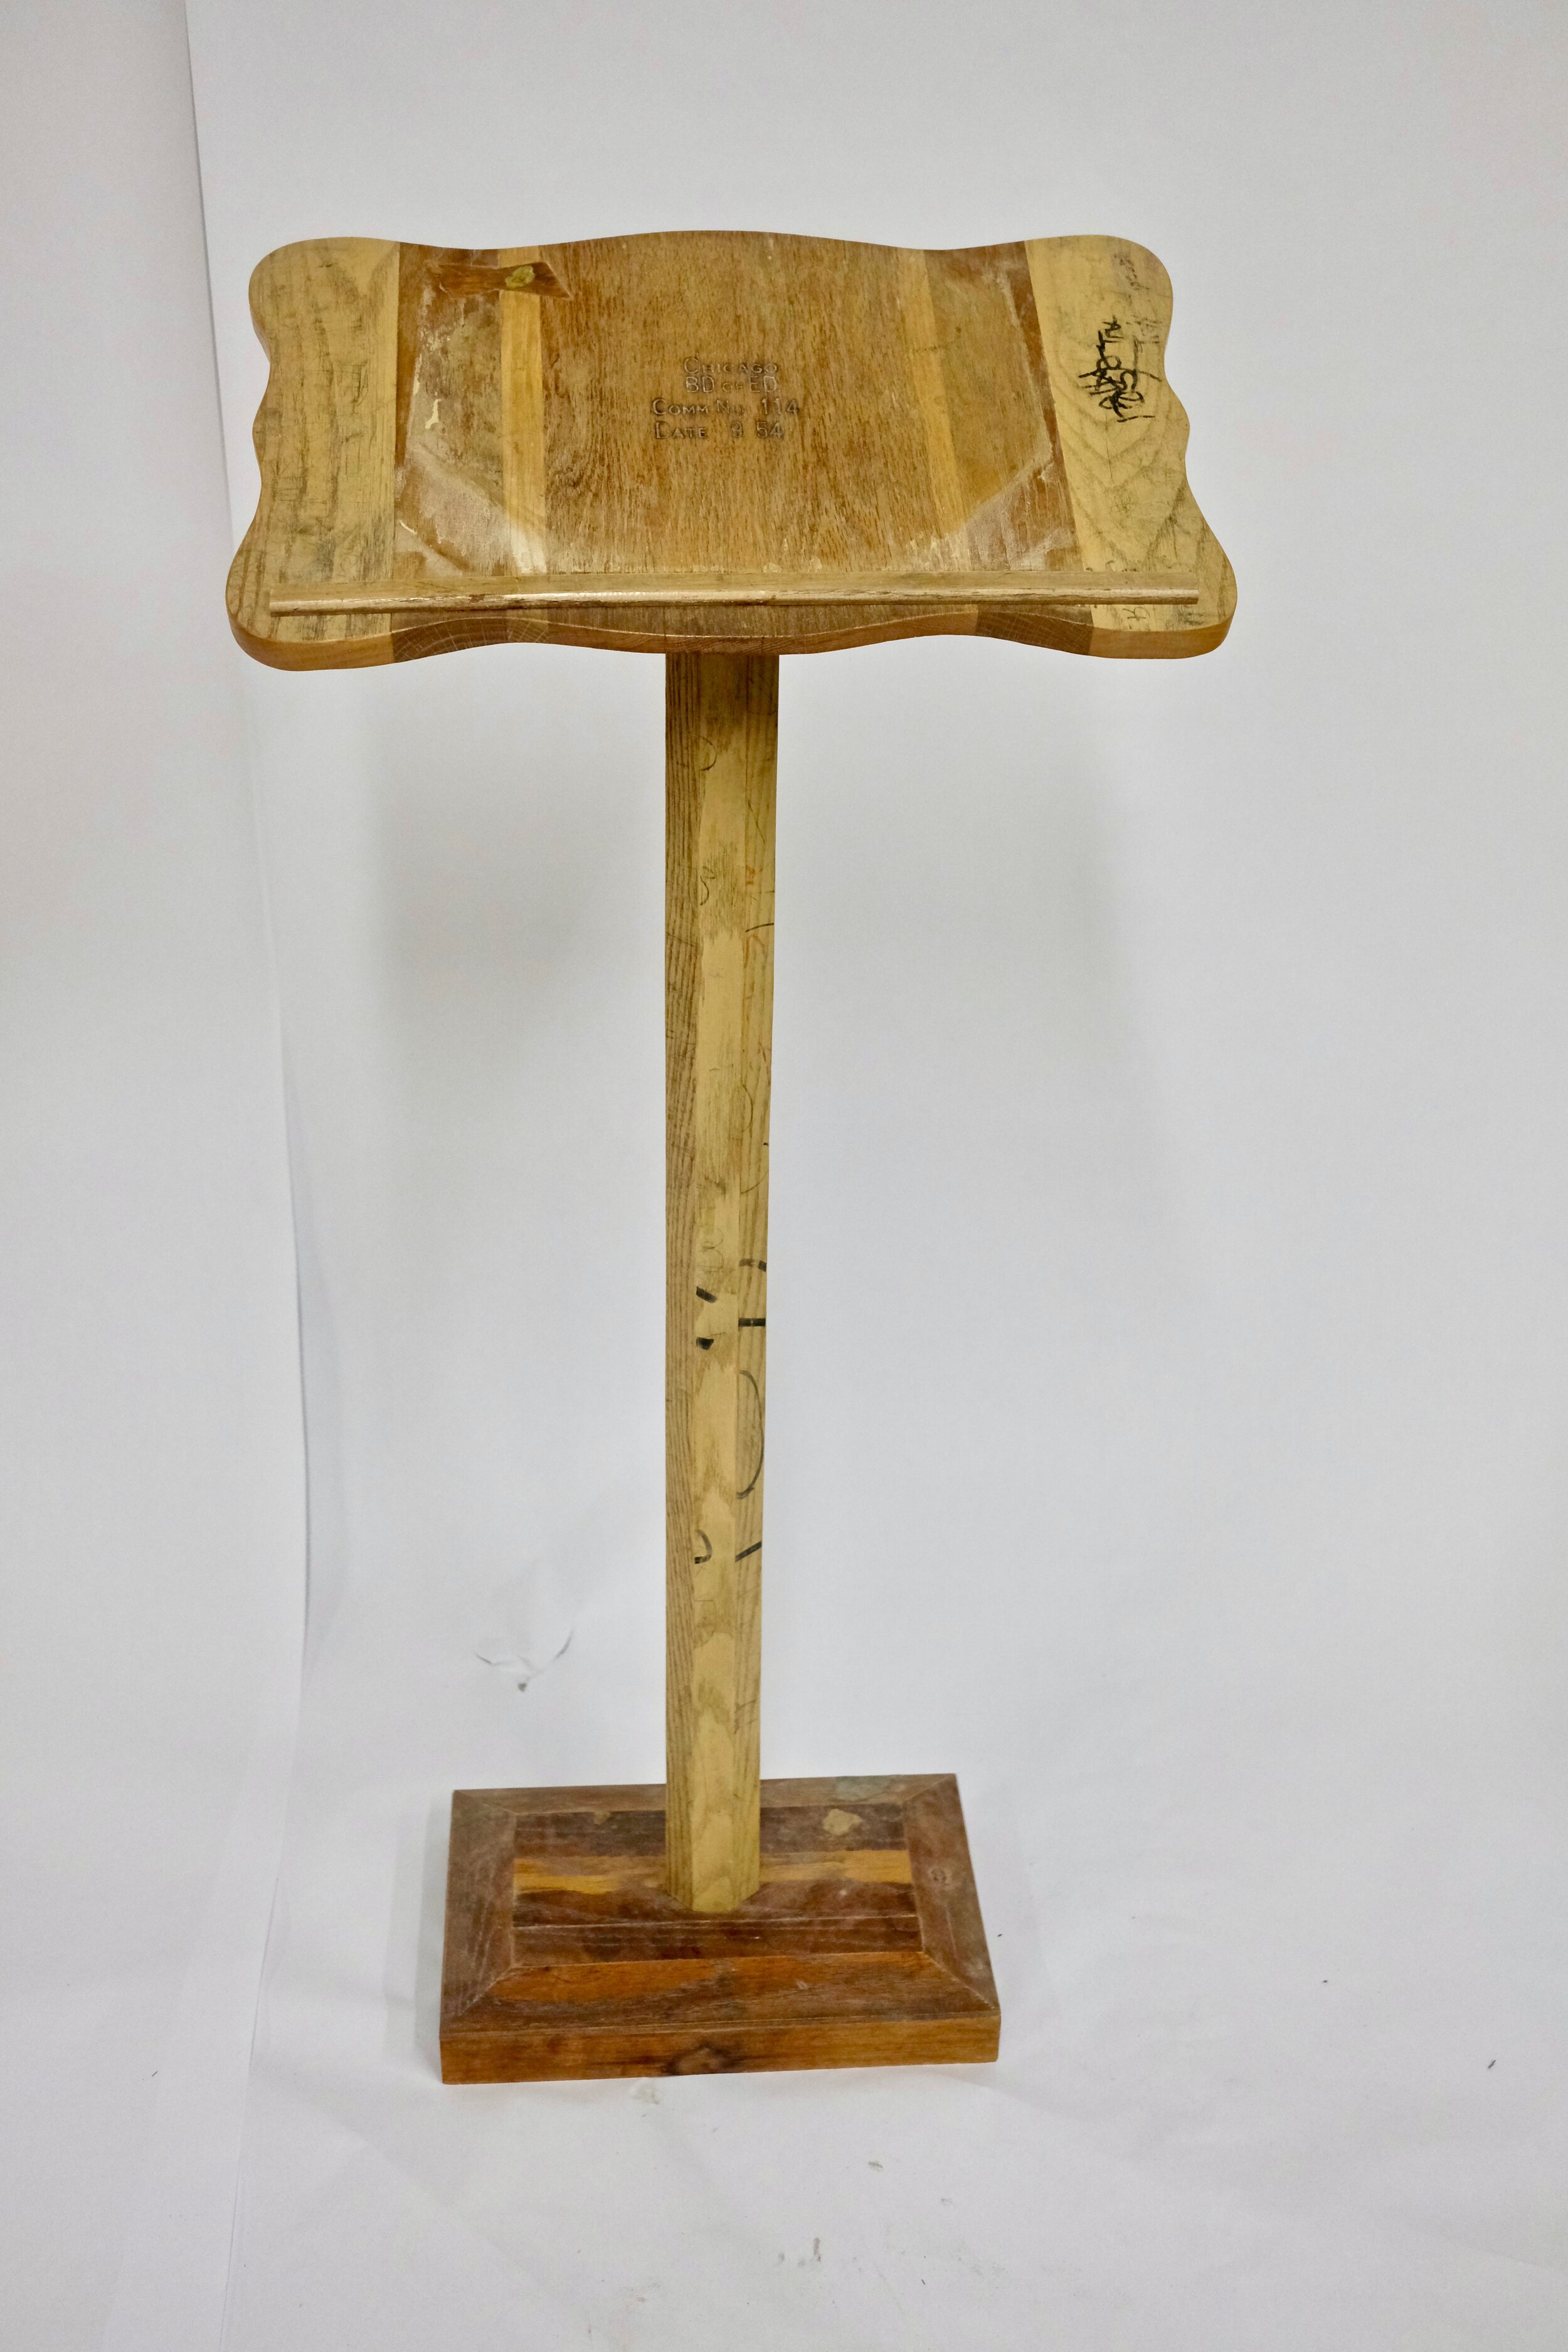 PEDESTAL I 48 x 21 x 31 in / 121.92 x 53.34 x 78.74 cm, materials salvaged from recently closed Chicago public schools, 2020